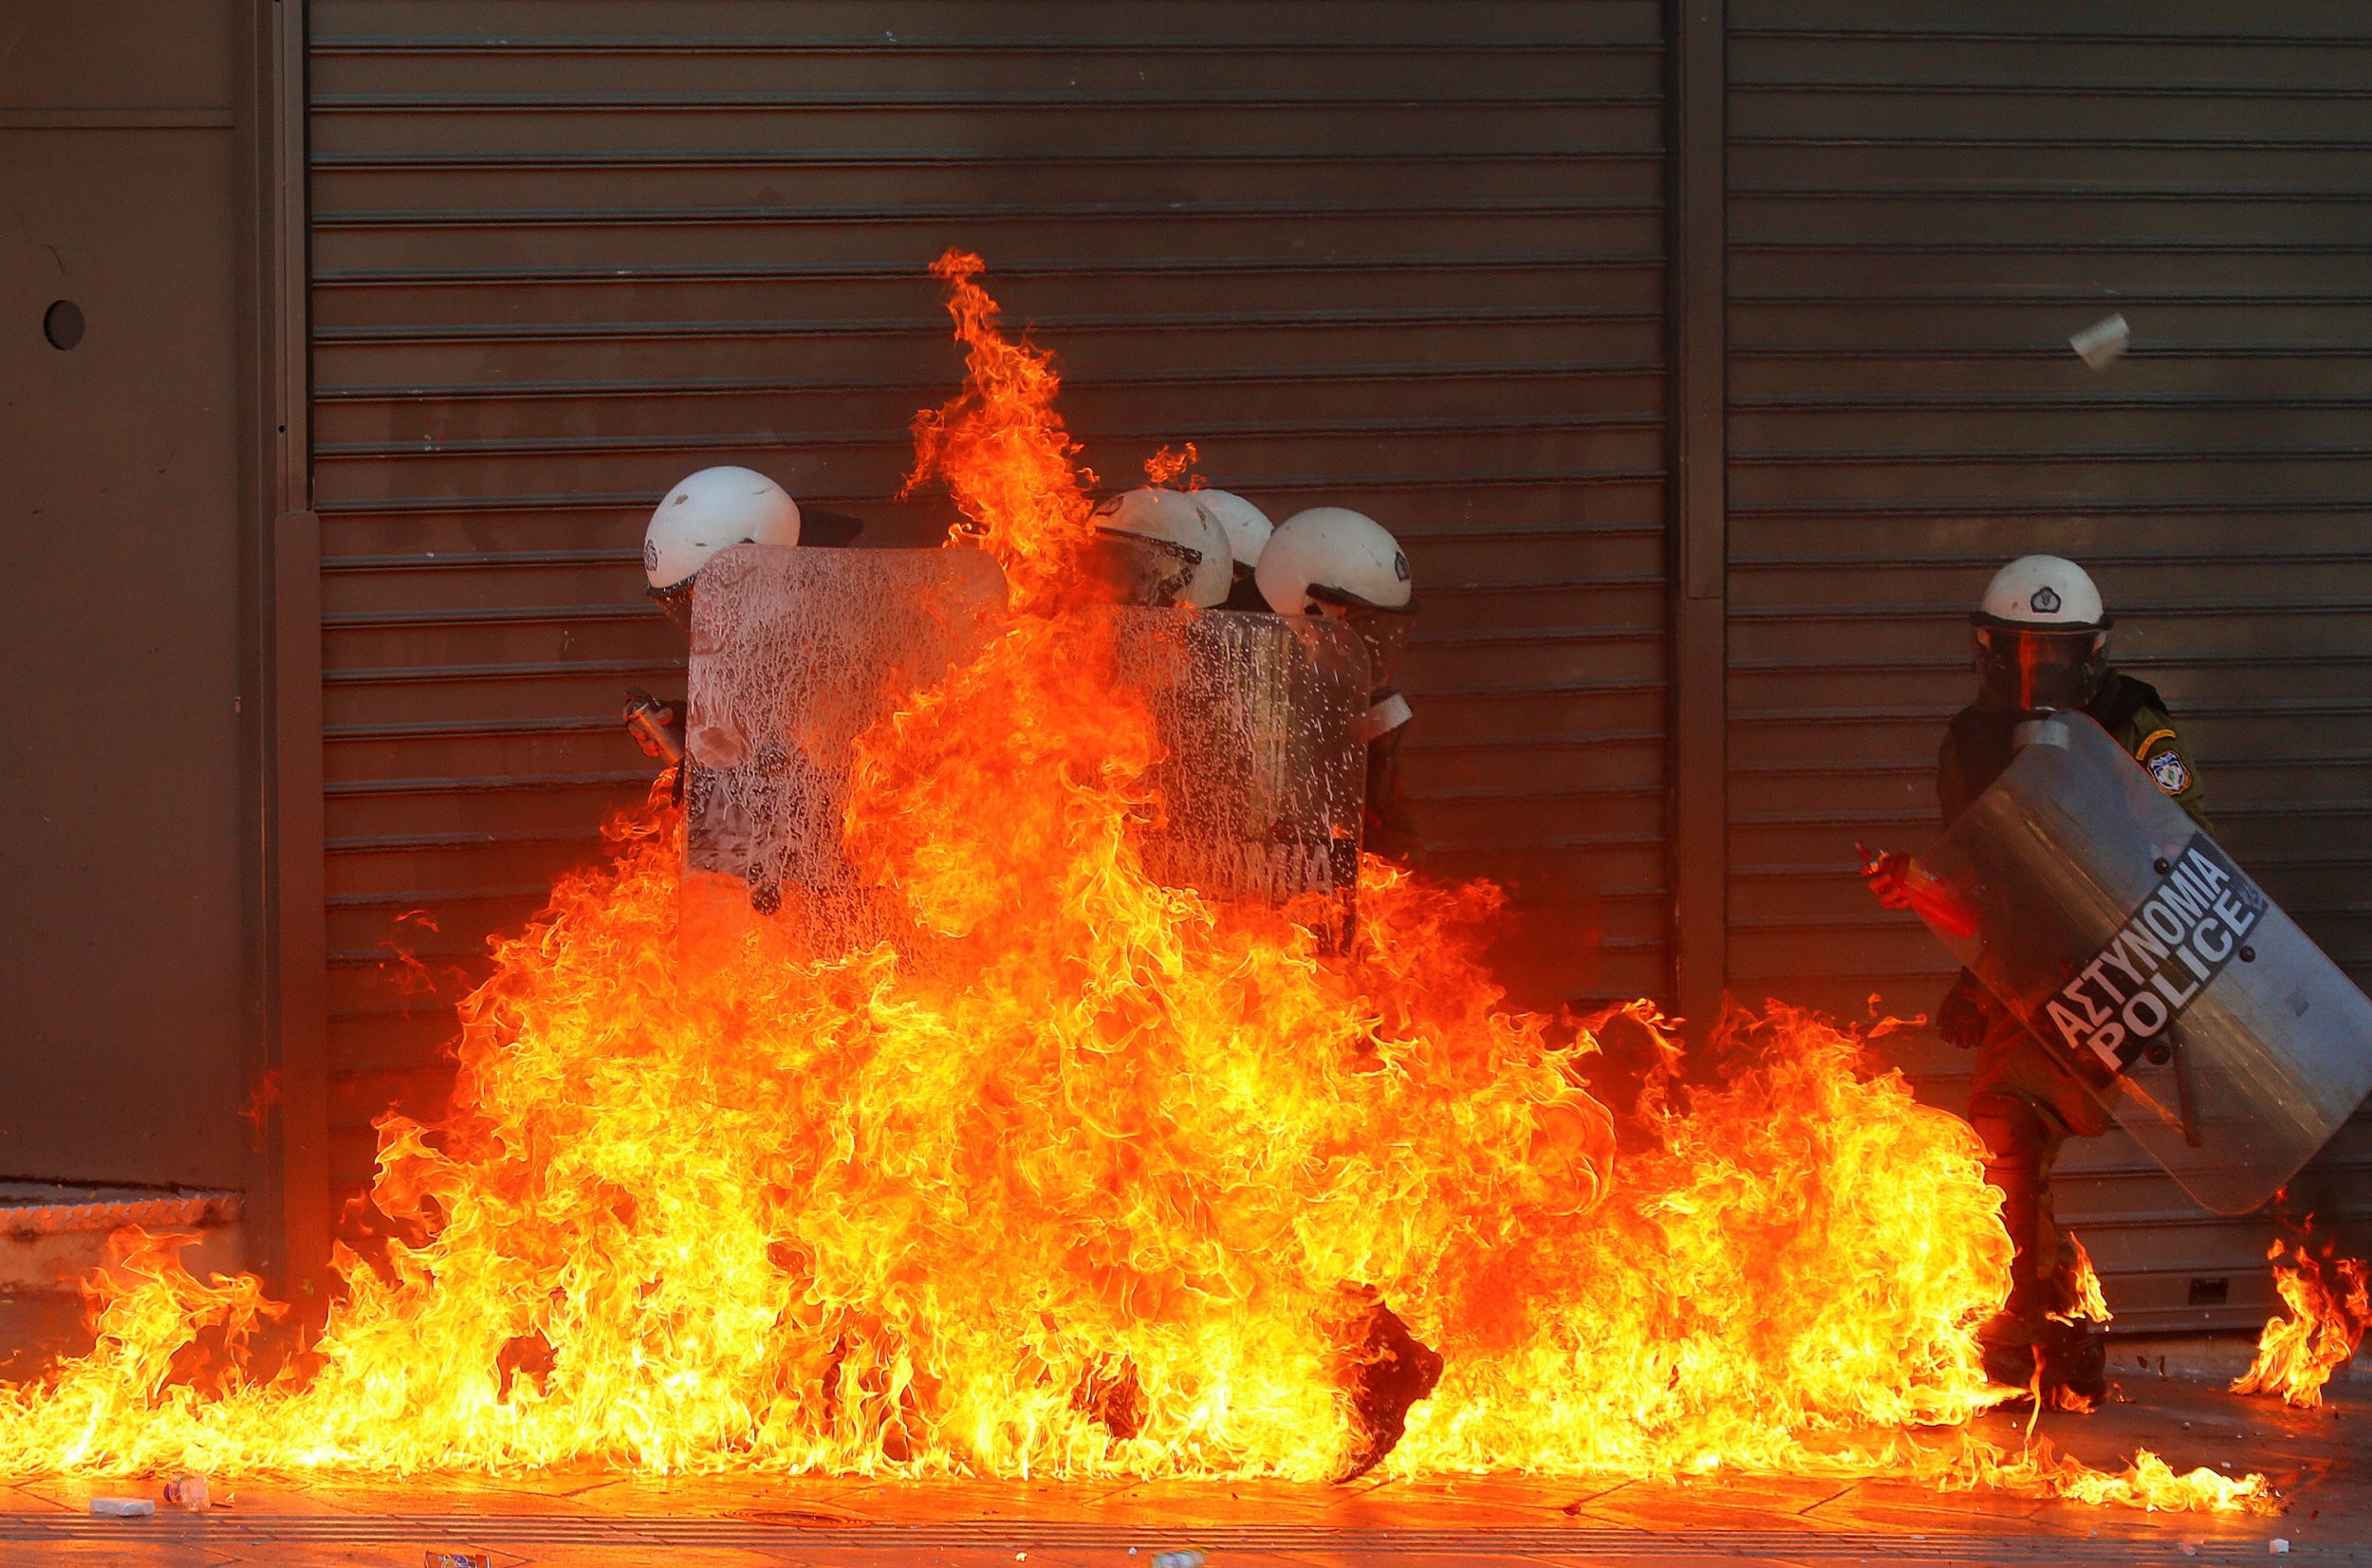 Petrol bombs in Syntagma Square, Athens in 2012